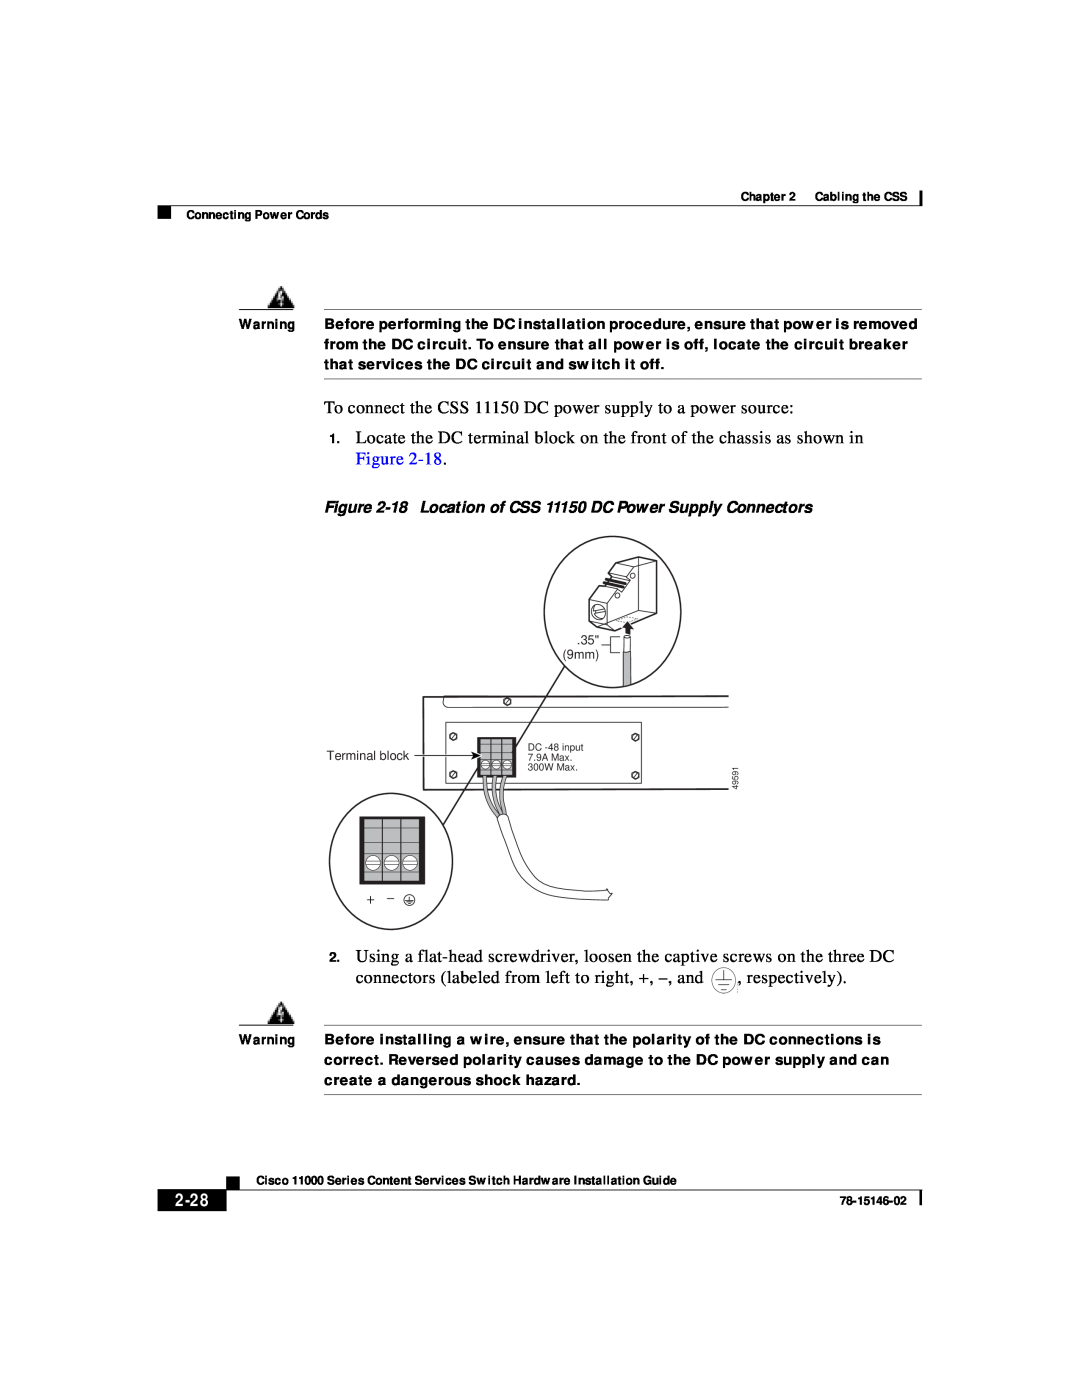 Cisco Systems 11000 Series manual To connect the CSS 11150 DC power supply to a power source, respectively, 2-28 